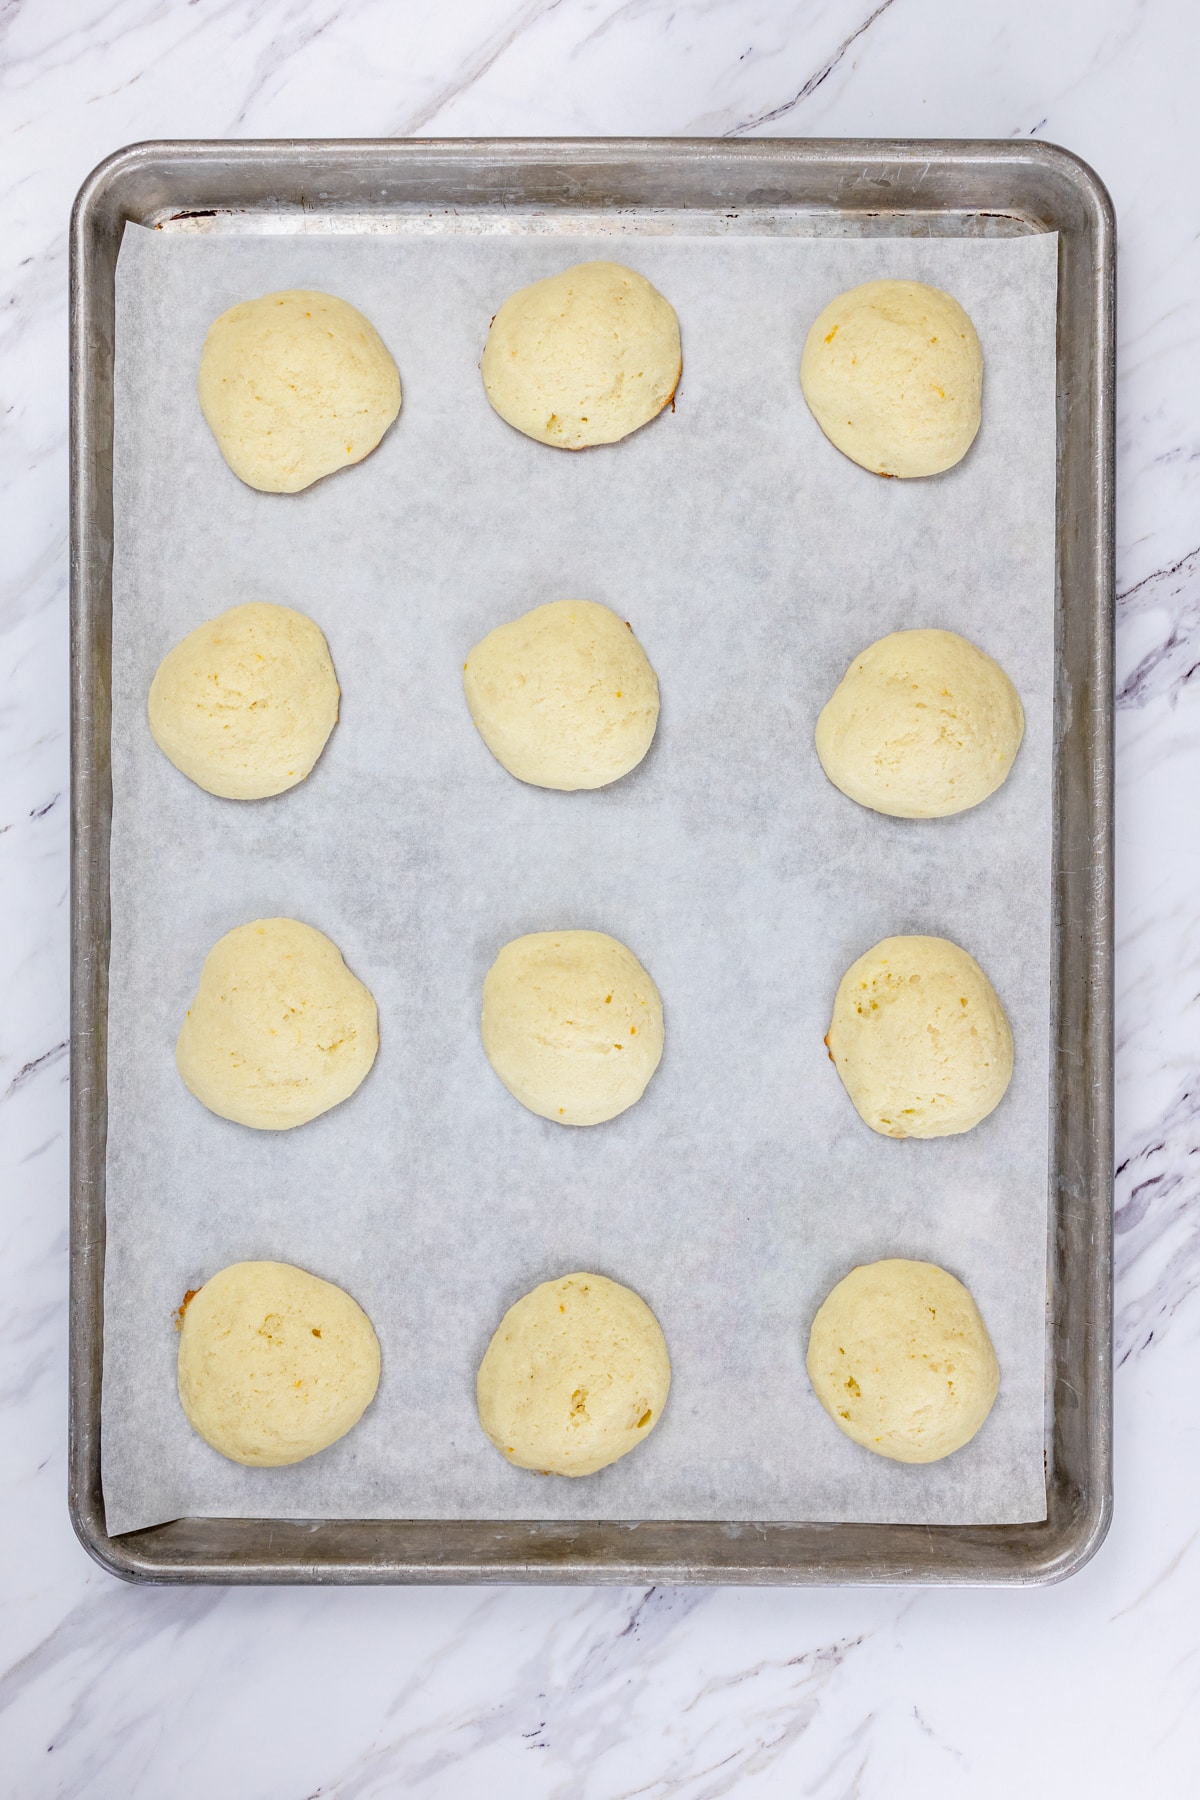 Top view of a baking tray with lemon ricotta cookie dough balls lined on it.